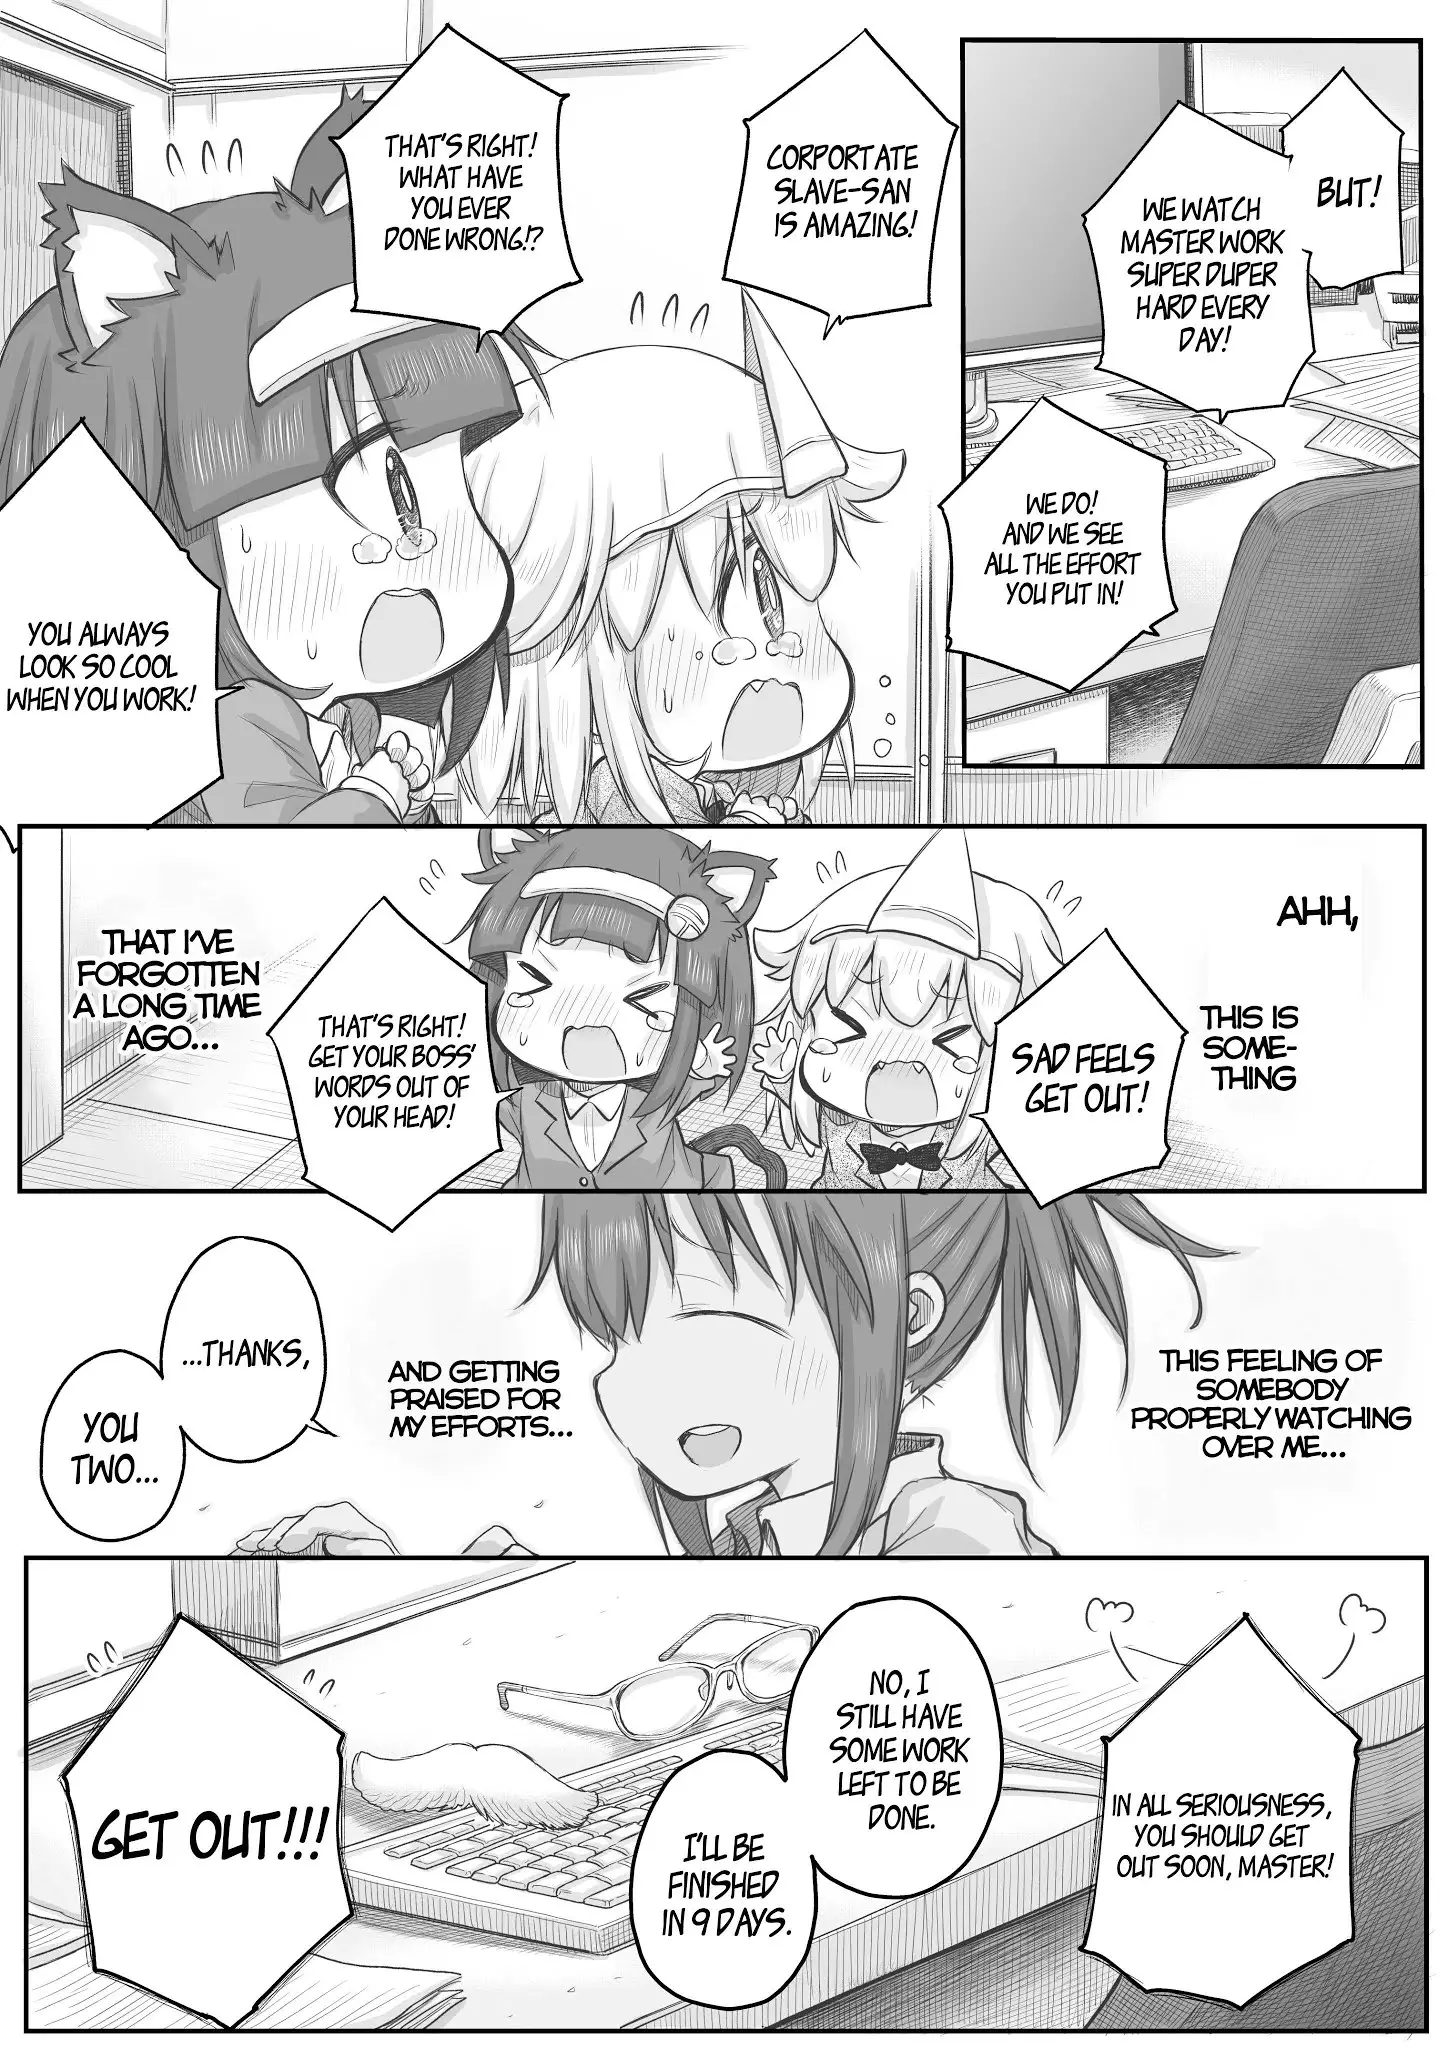 Ms. Corporate Slave Wants To Be Healed By A Loli Spirit - 29 page 4-82918837